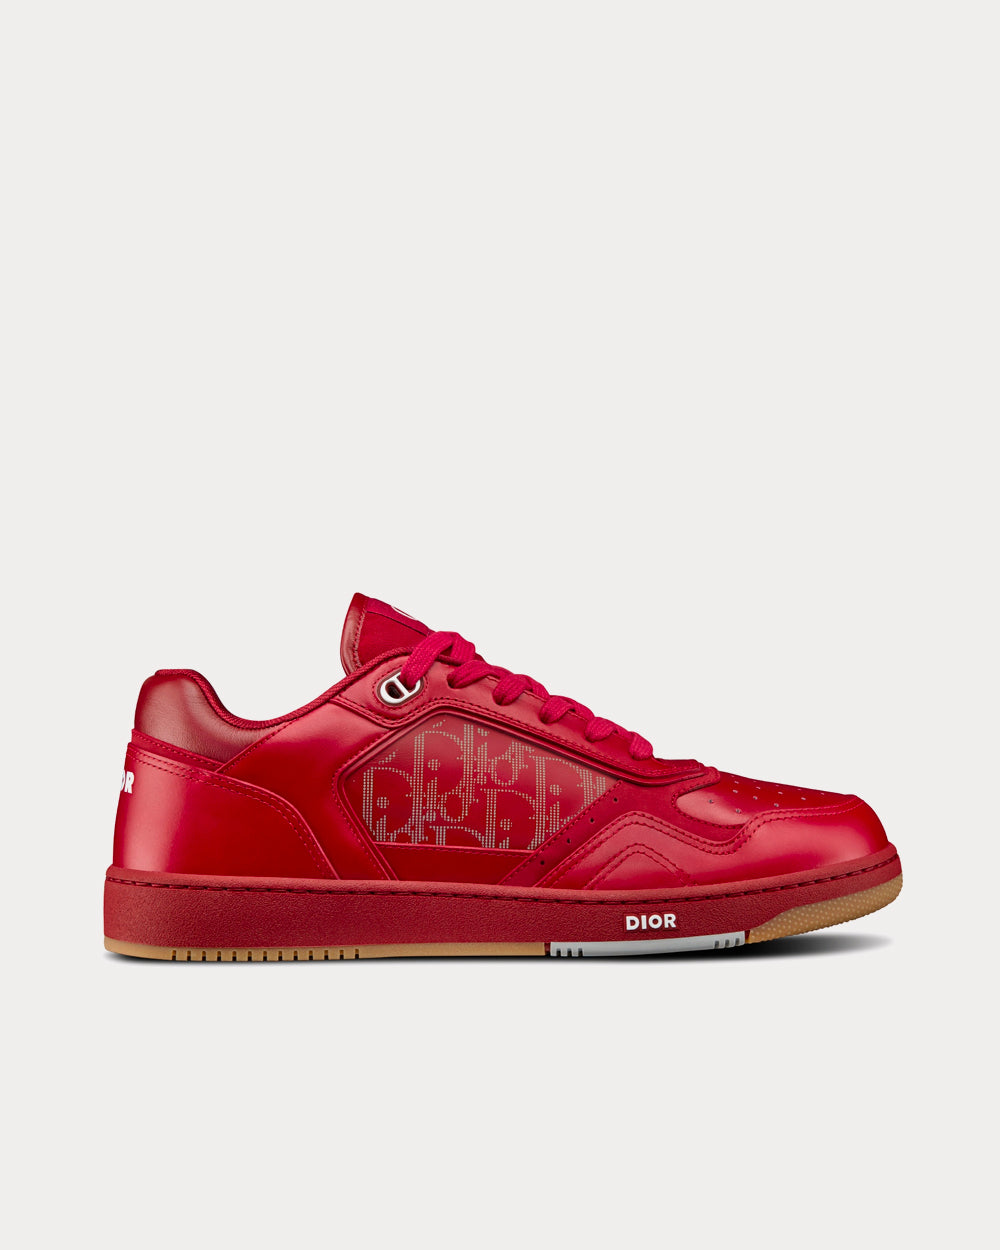 World Tour B27 Red Dior Oblique Galaxy Leather with Smooth Calfskin and  Suede Low Top Sneakers